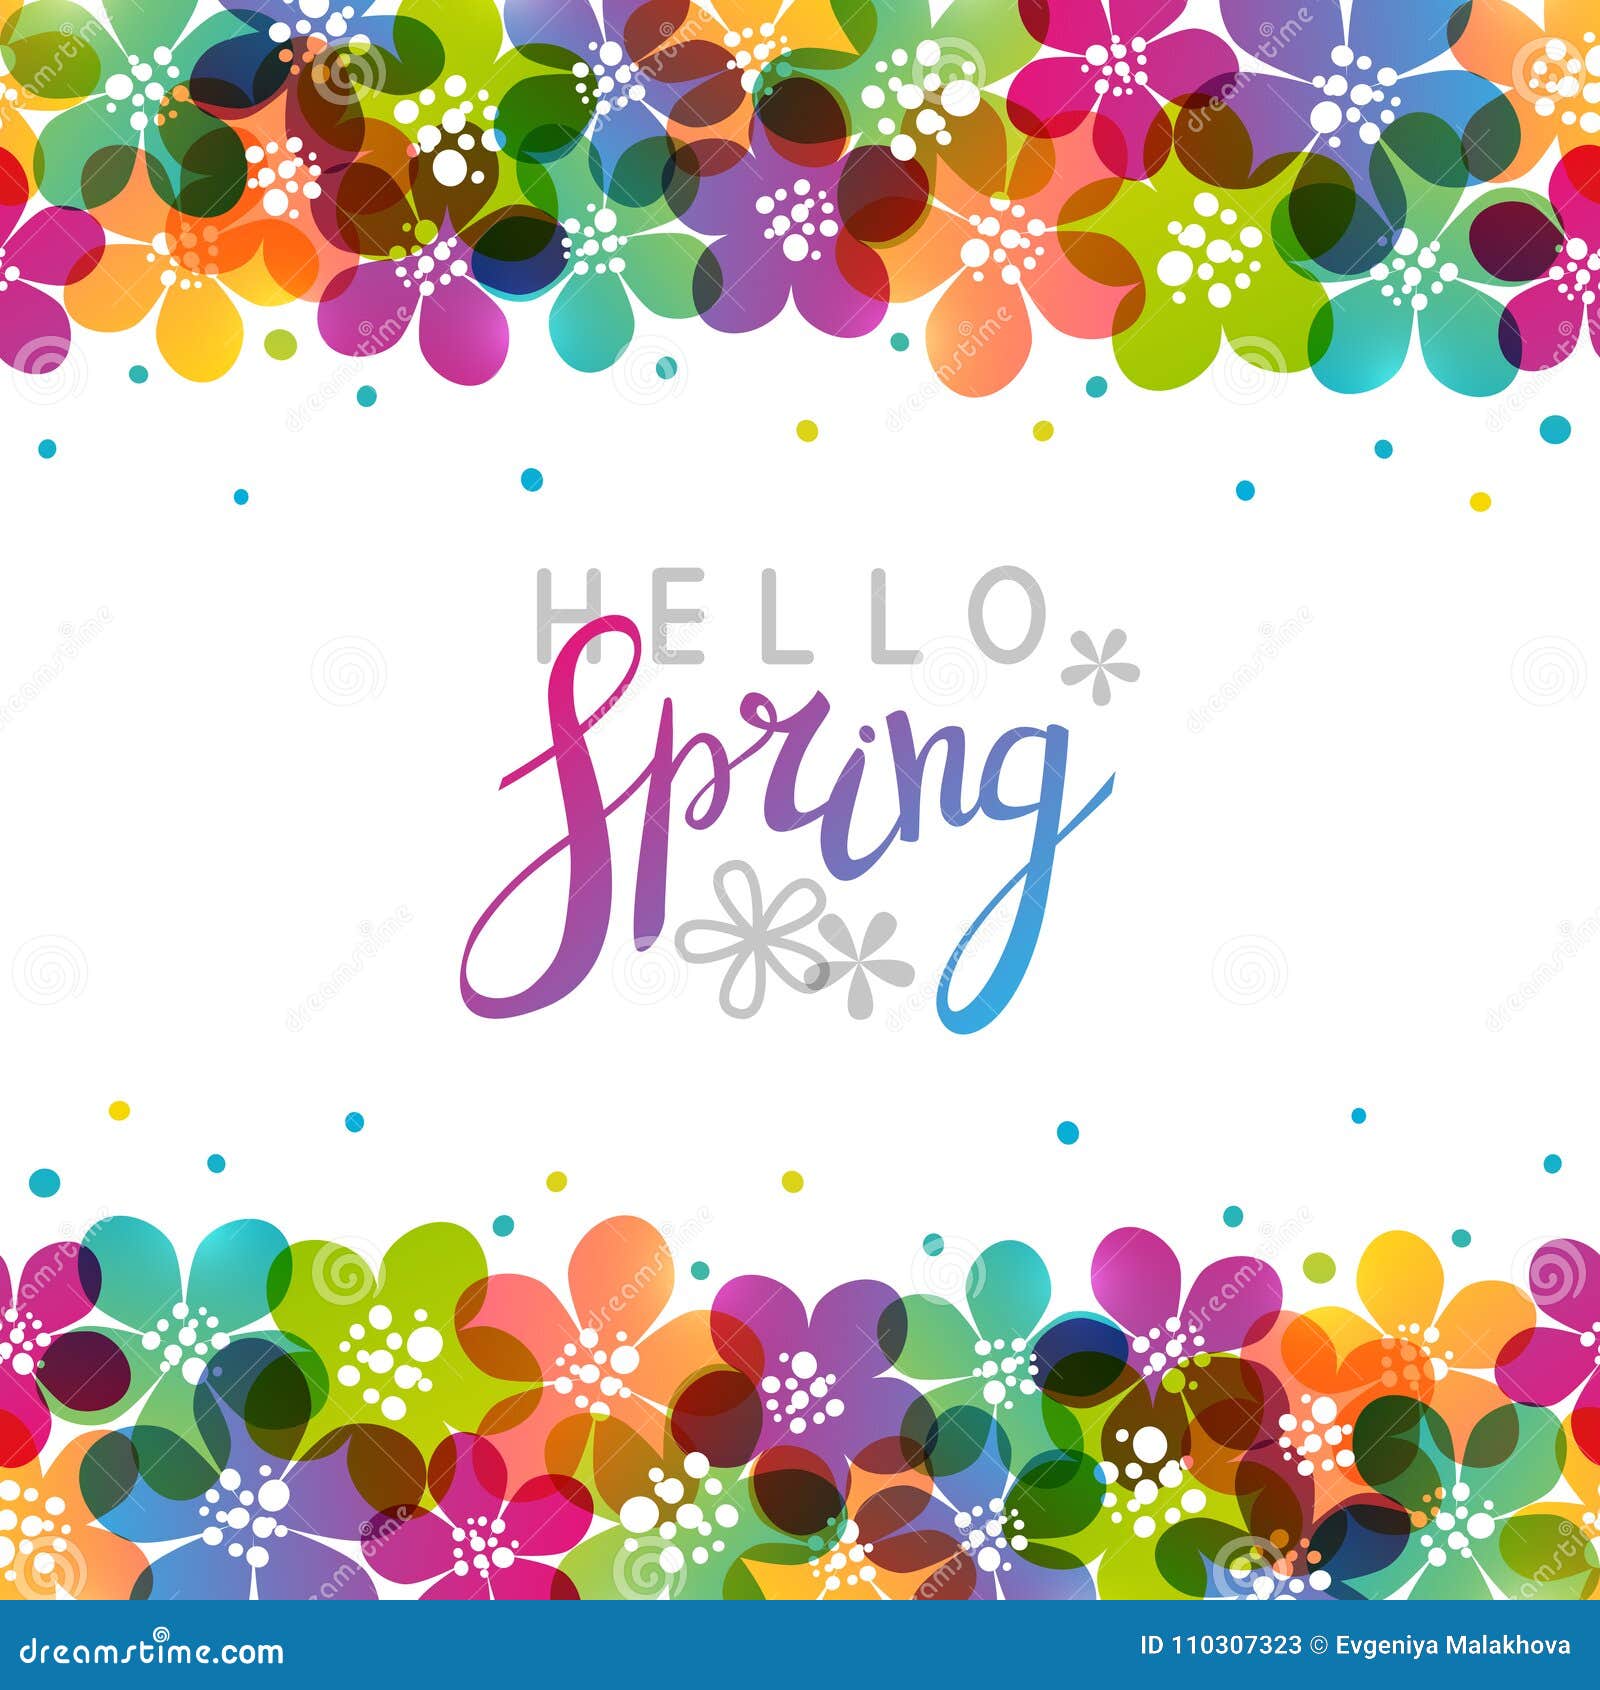 spring background with vibrant flowers